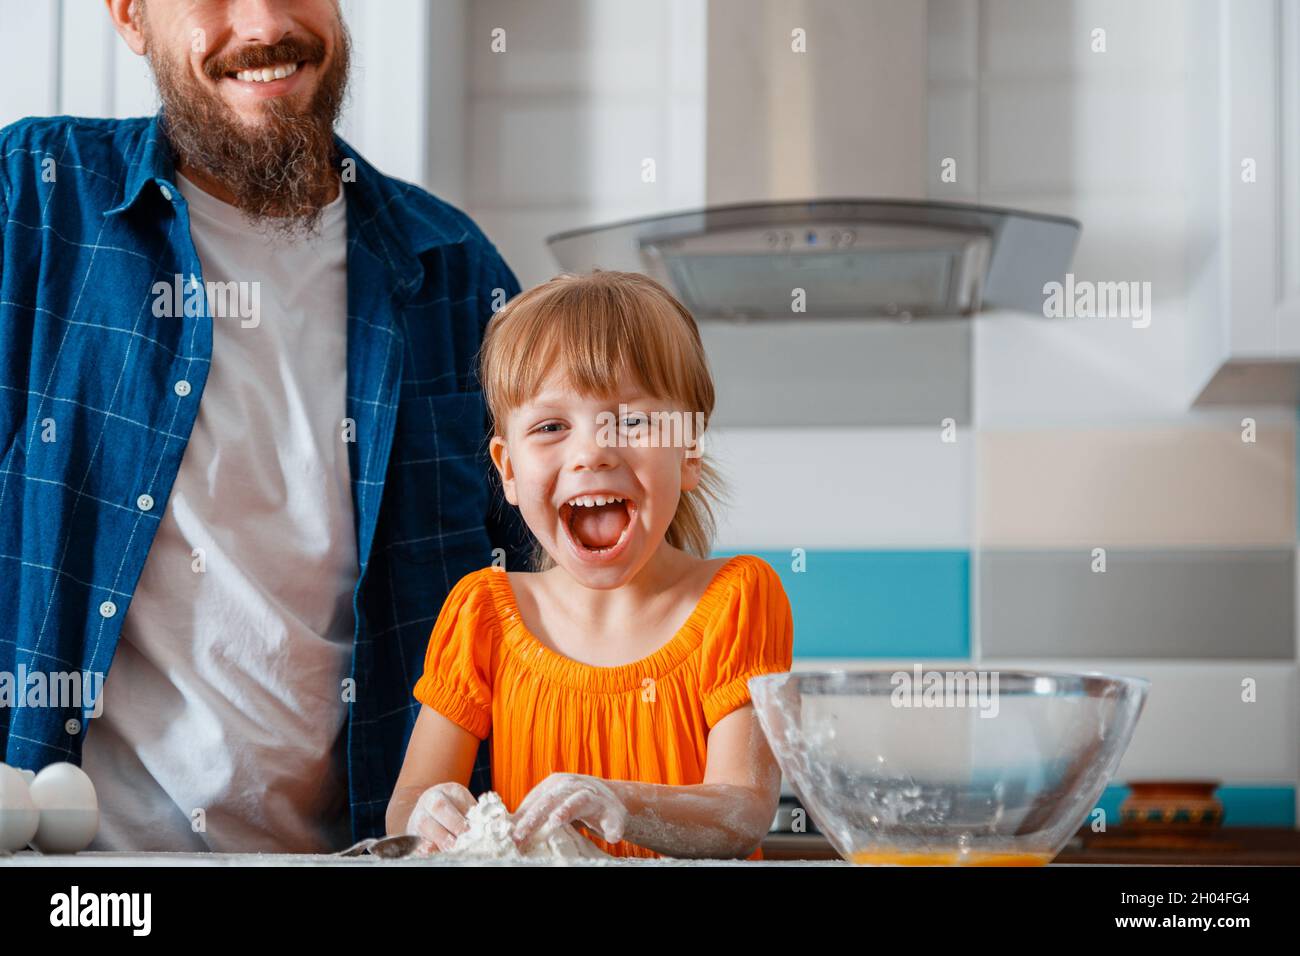 Happy family daughter and father having fun Laugh Smile While cooking food in kitchen interior. Child girl daughter kneads flour dough near dad Stock Photo